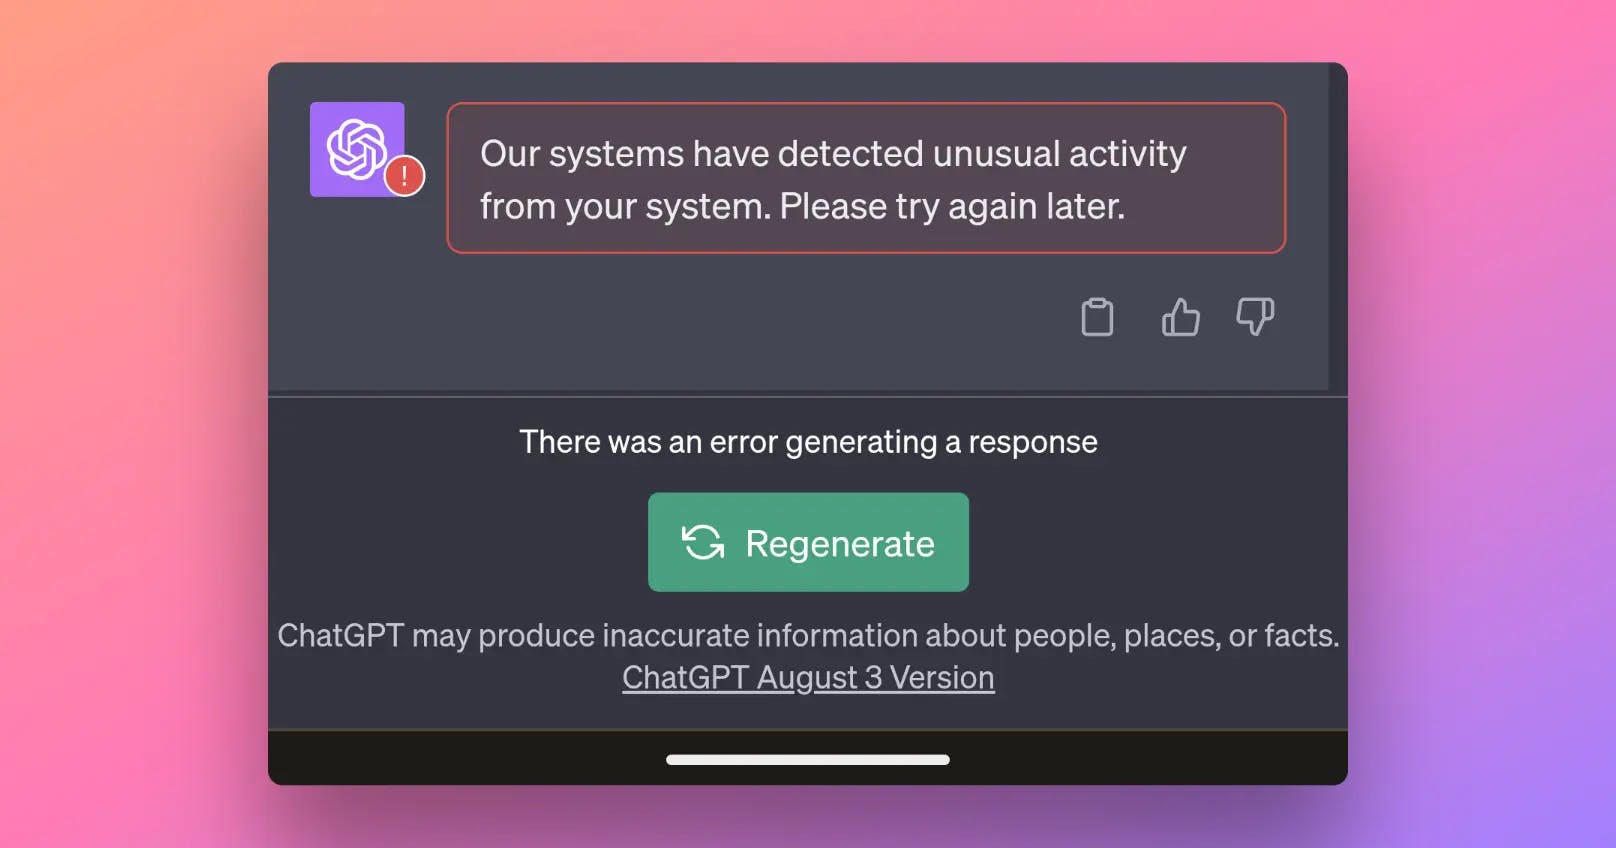 How to Respond to Unusual Activity Detected from ChatGPT